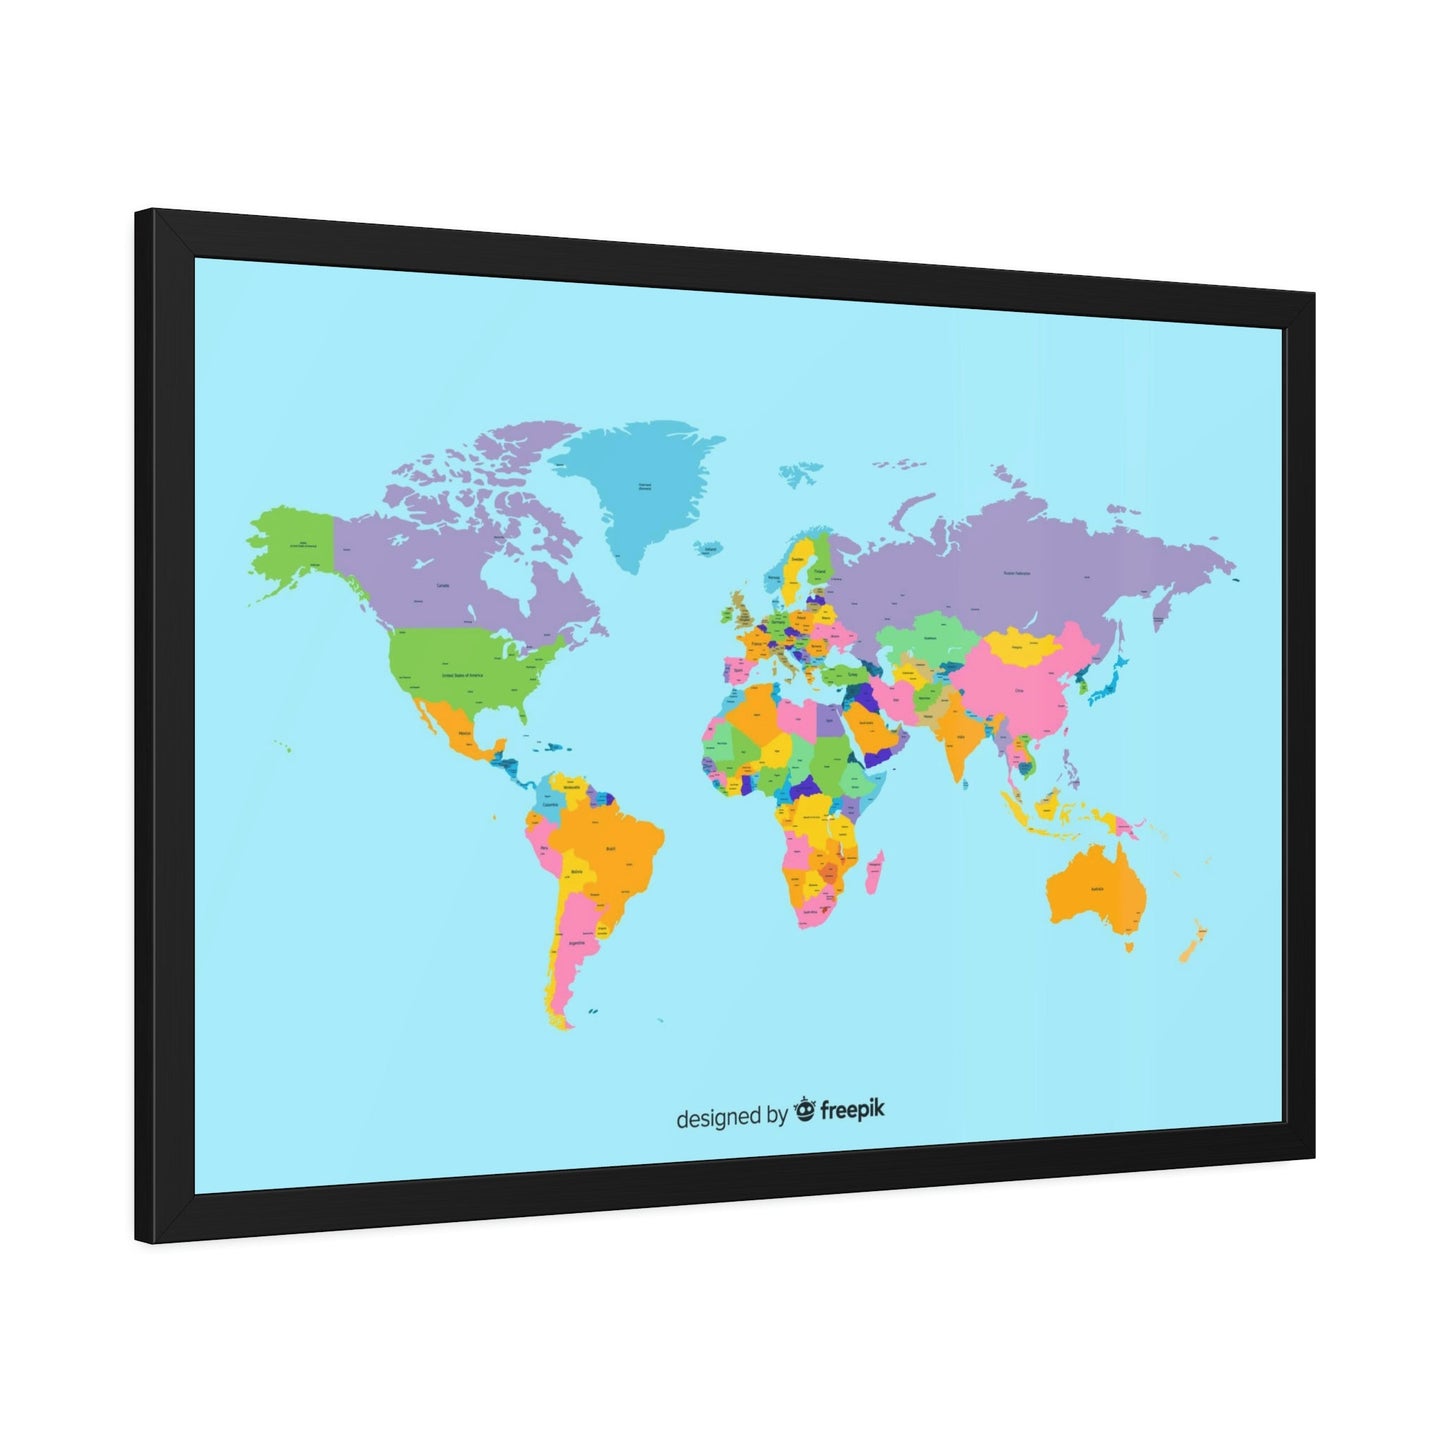 New Perspective on the World: Natural Canvas and Poster Map Art